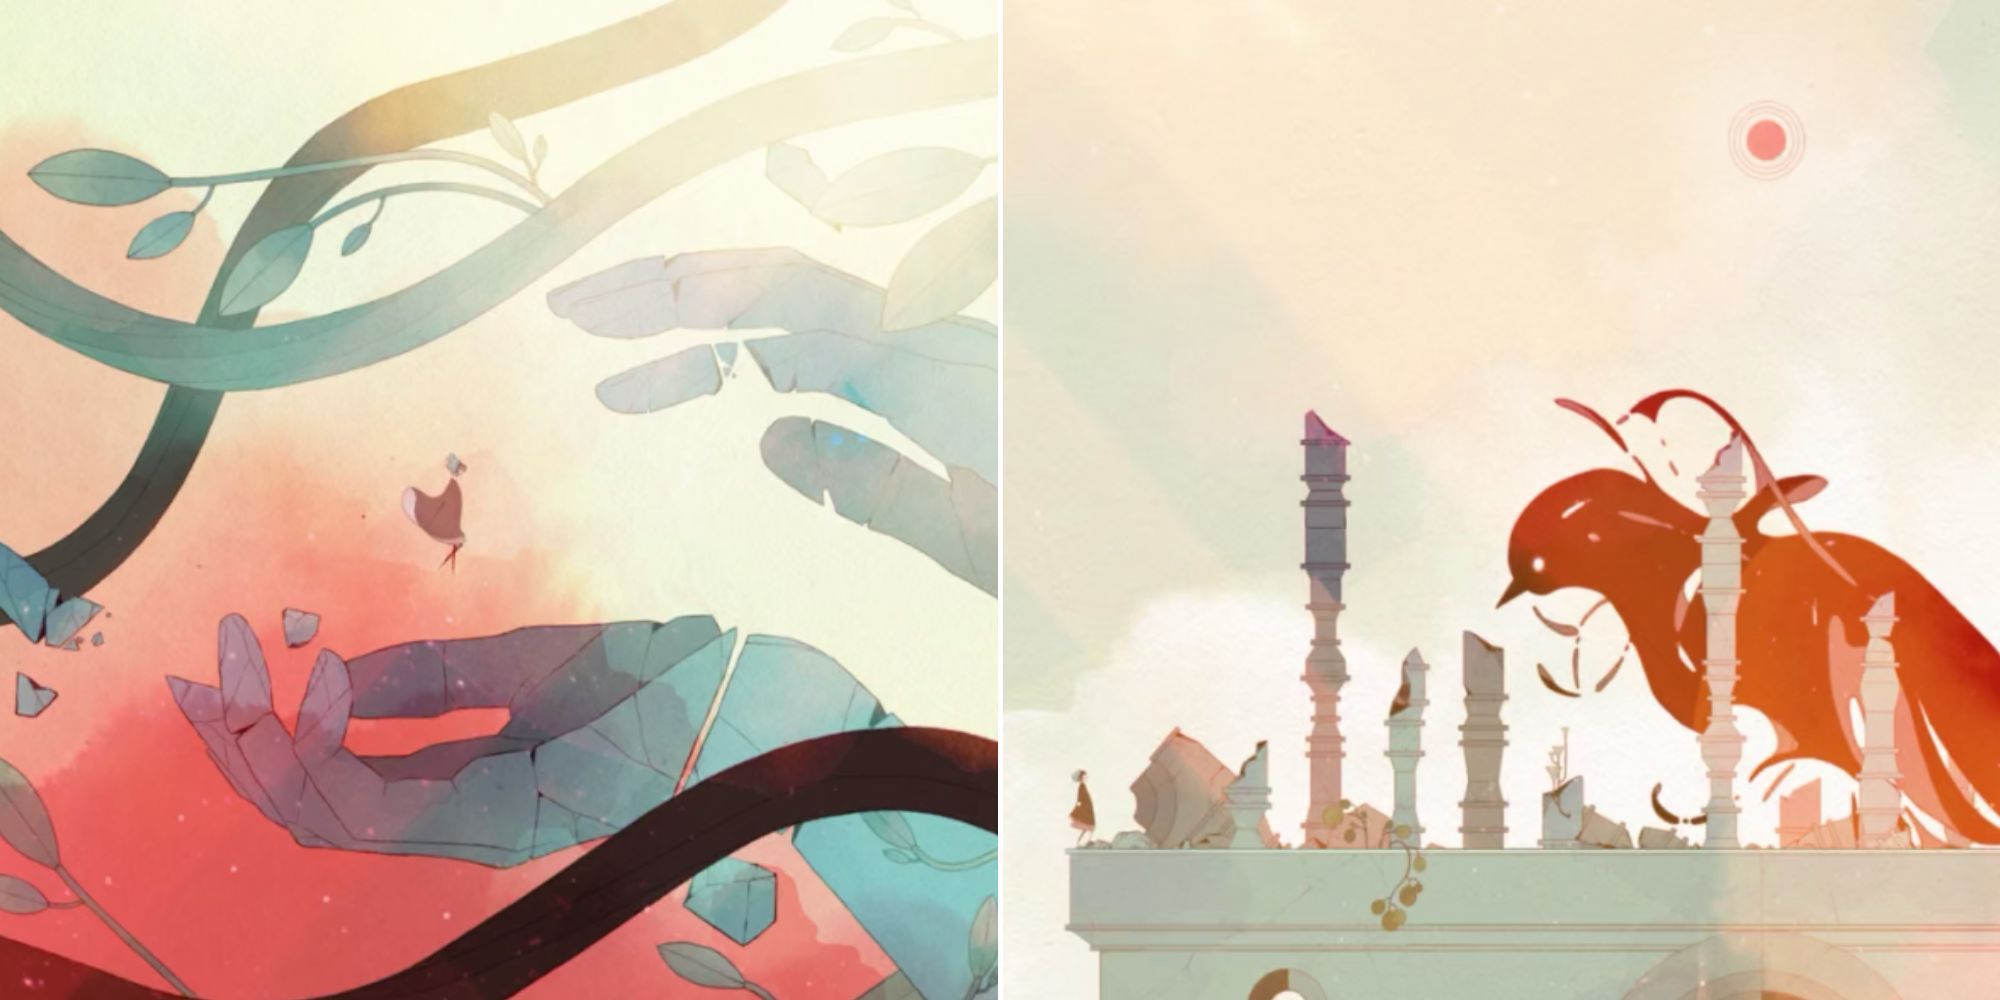 Gris floating in-between a statue's hands and Gris meeting the giant bird in Gris